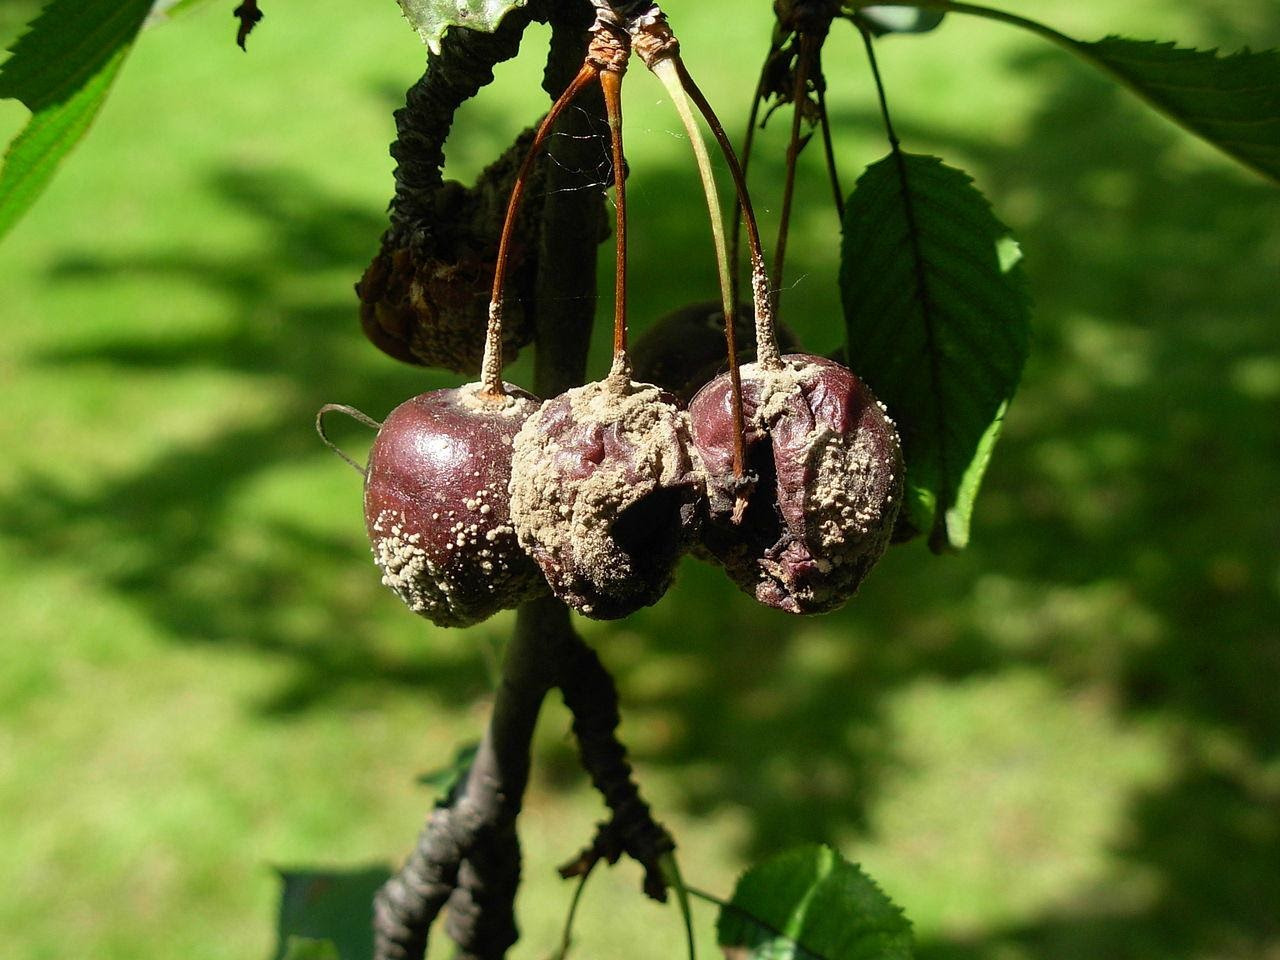 https://upload.wikimedia.org/wikipedia/commons/thumb/d/d0/Cherries_attacked_by_fungi_03.JPG/1280px-Cherries_attacked_by_fungi_03.JPG